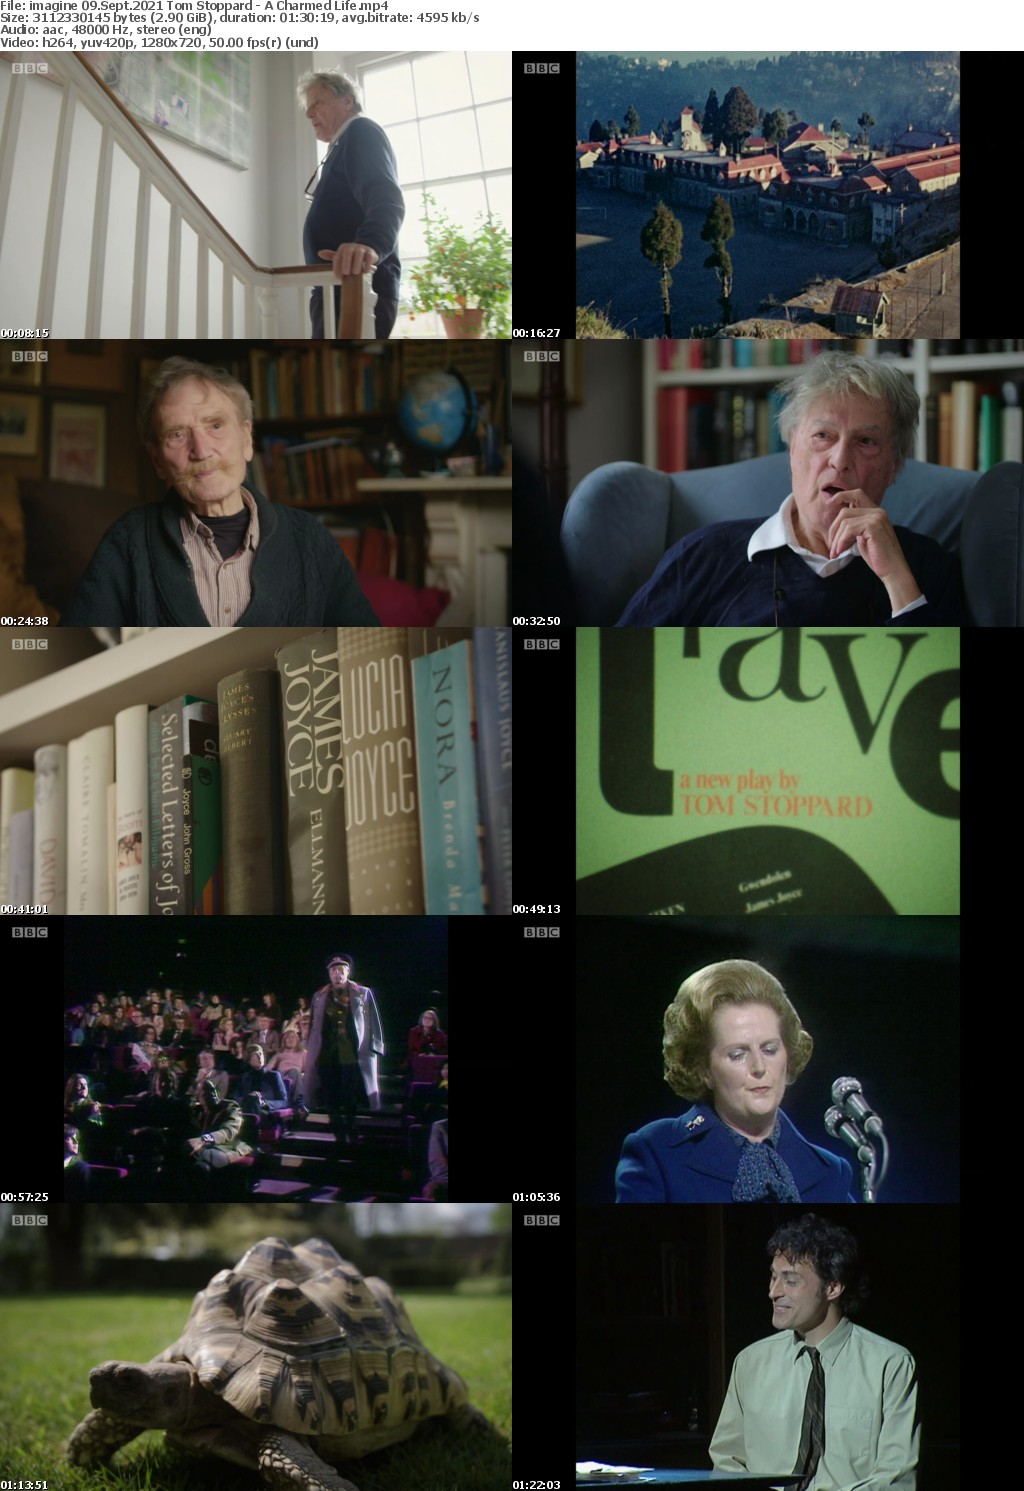 imagine 09 Sept 2021 Tom Stoppard - A Charmed Life (1280x720p HD, 50fps, soft Eng subs)